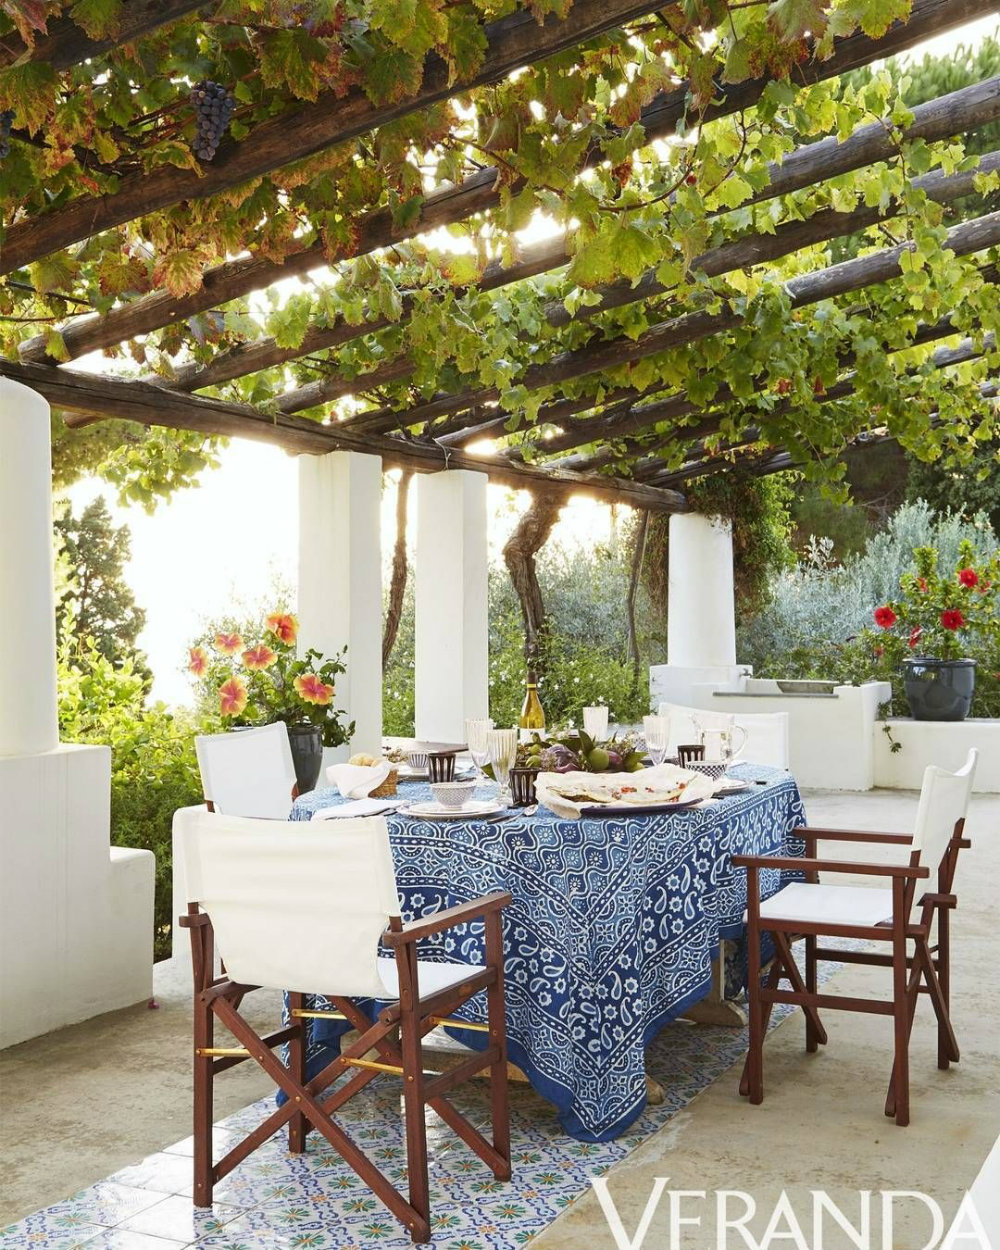 7 Stunning Patio Design Ideas For This Summer 07